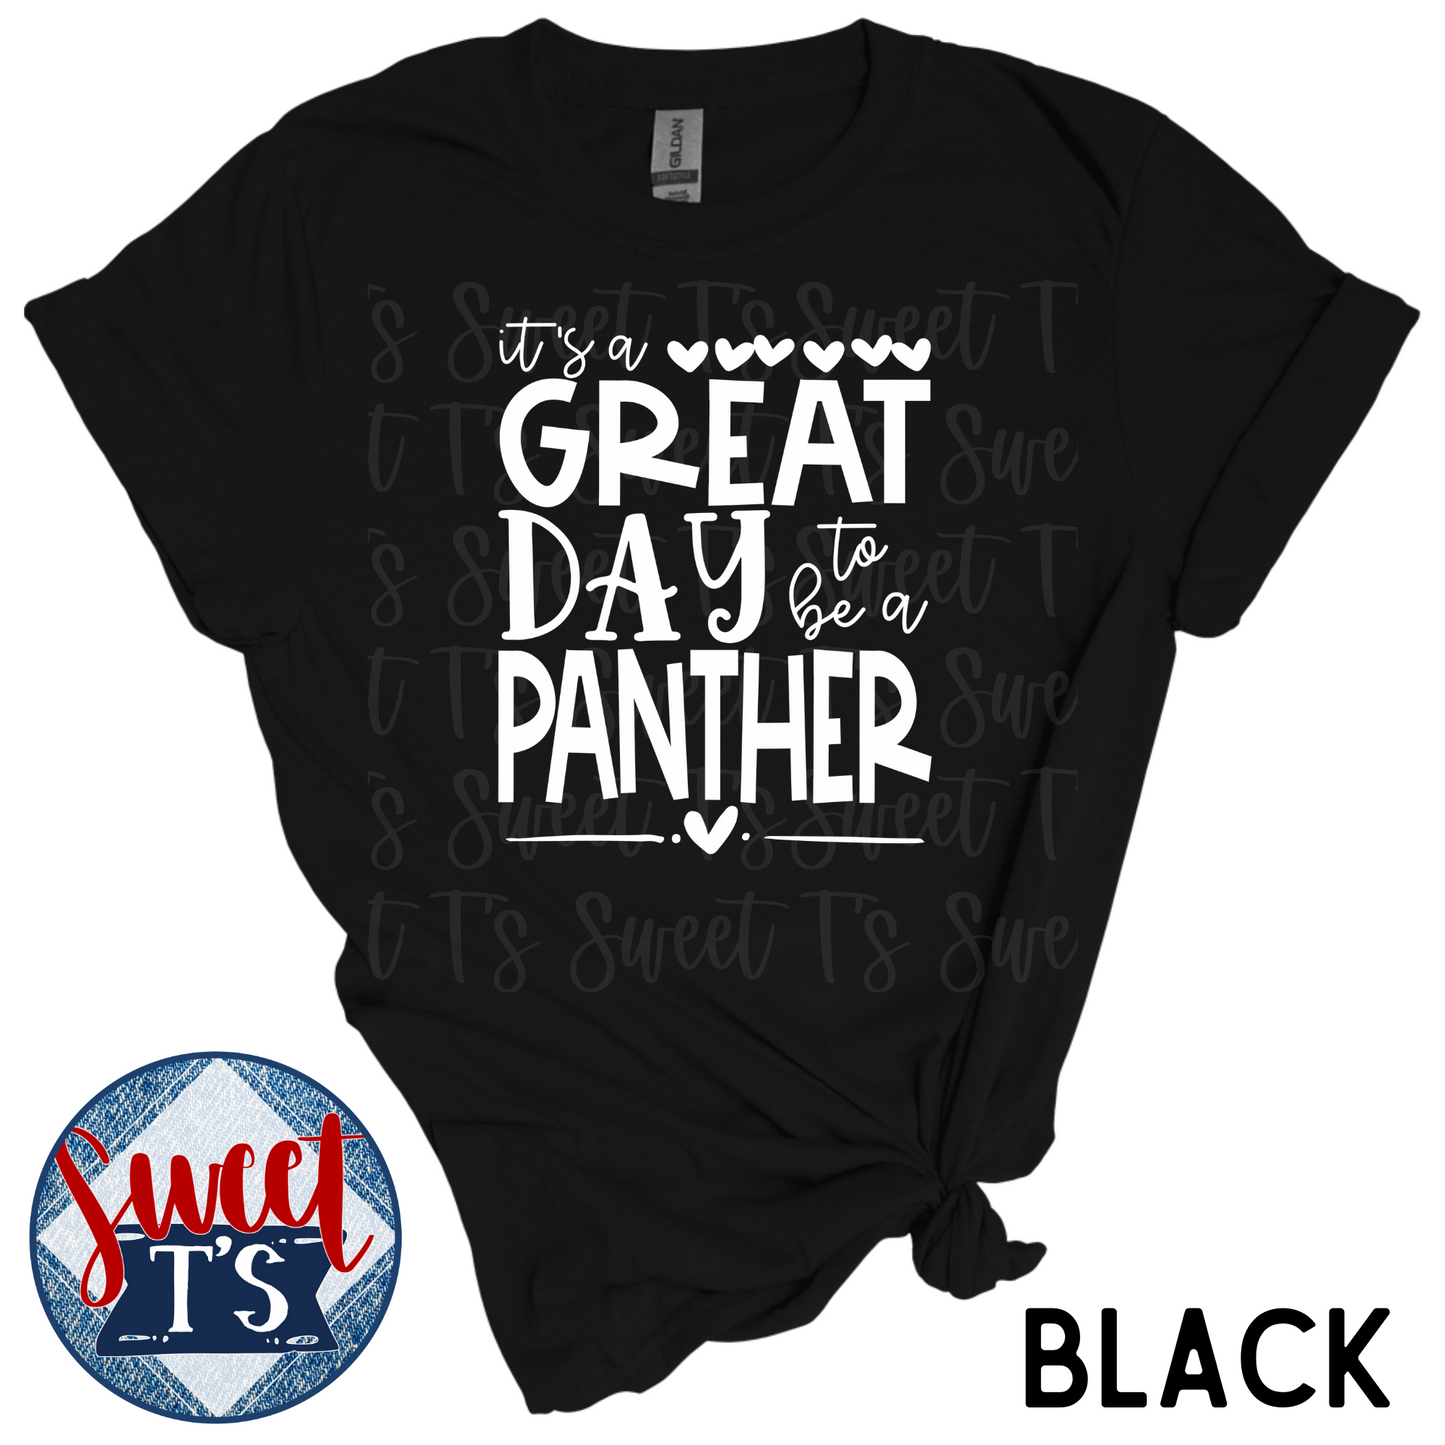 Great Day Panthers (white print)